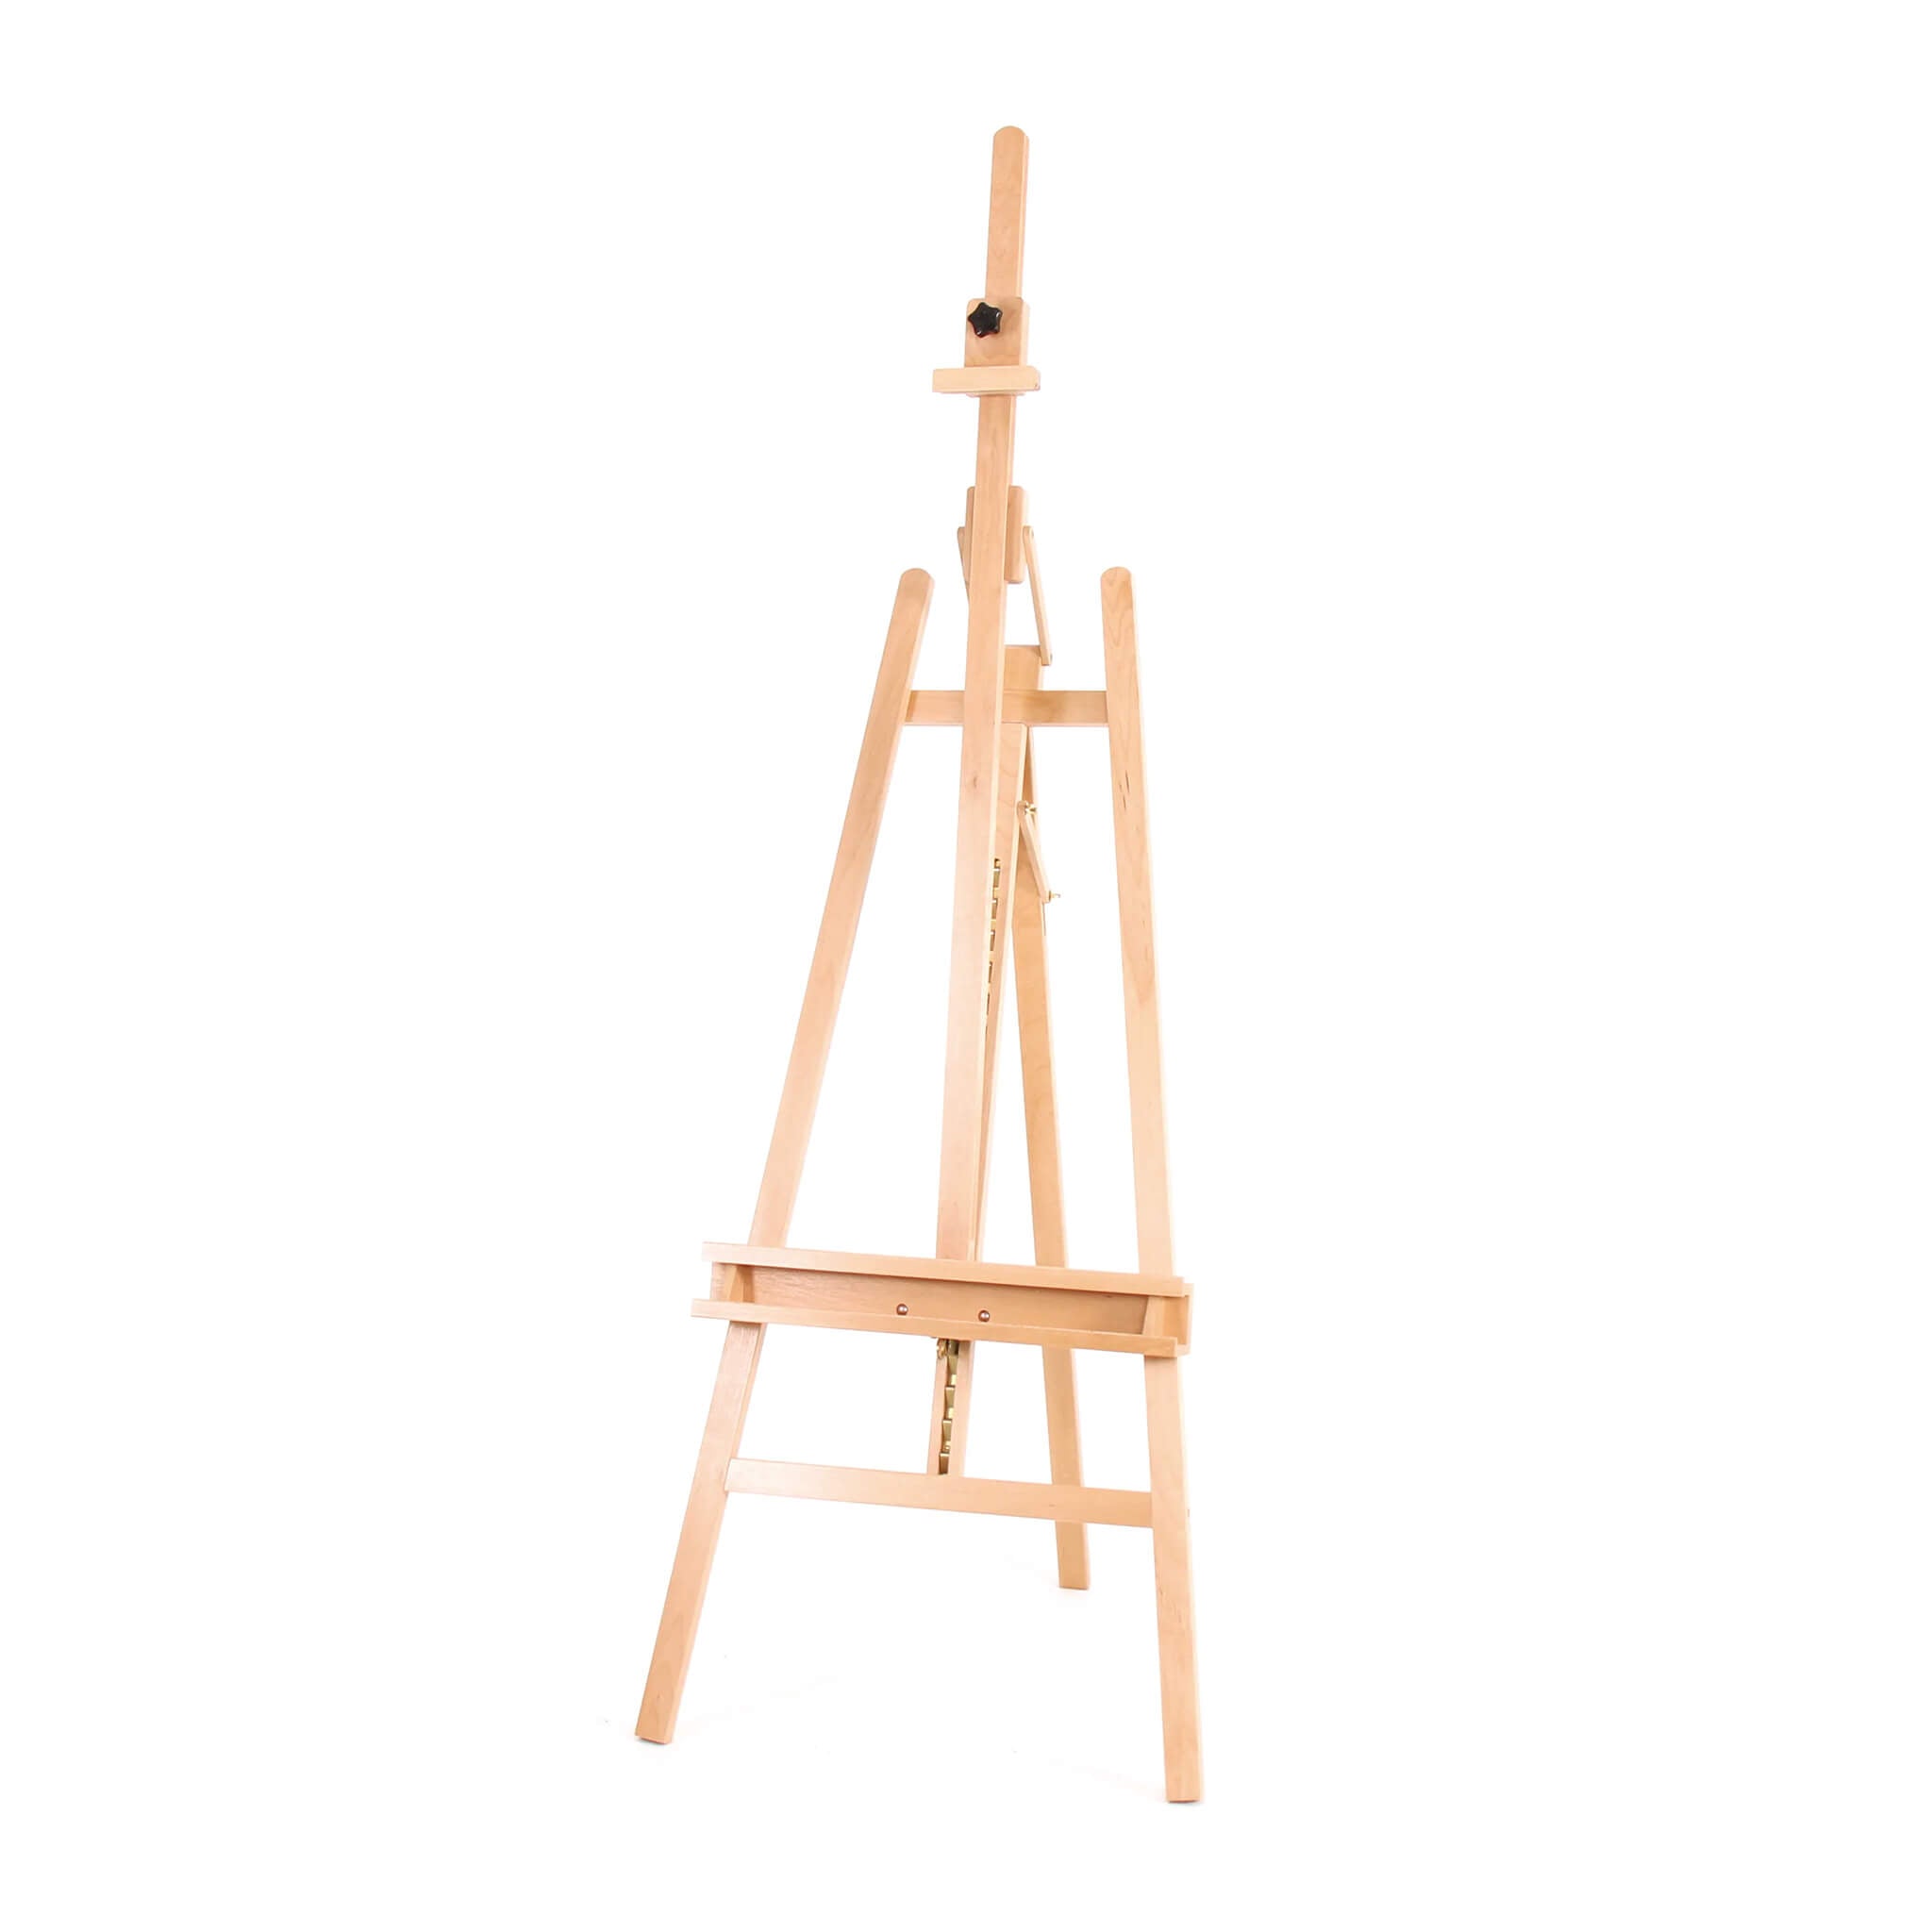 SoHo Urban Artist Black Aluminum Tabletop Easel Stand, Portable Easel for  Display, Painting Canvas and More, Set of 12